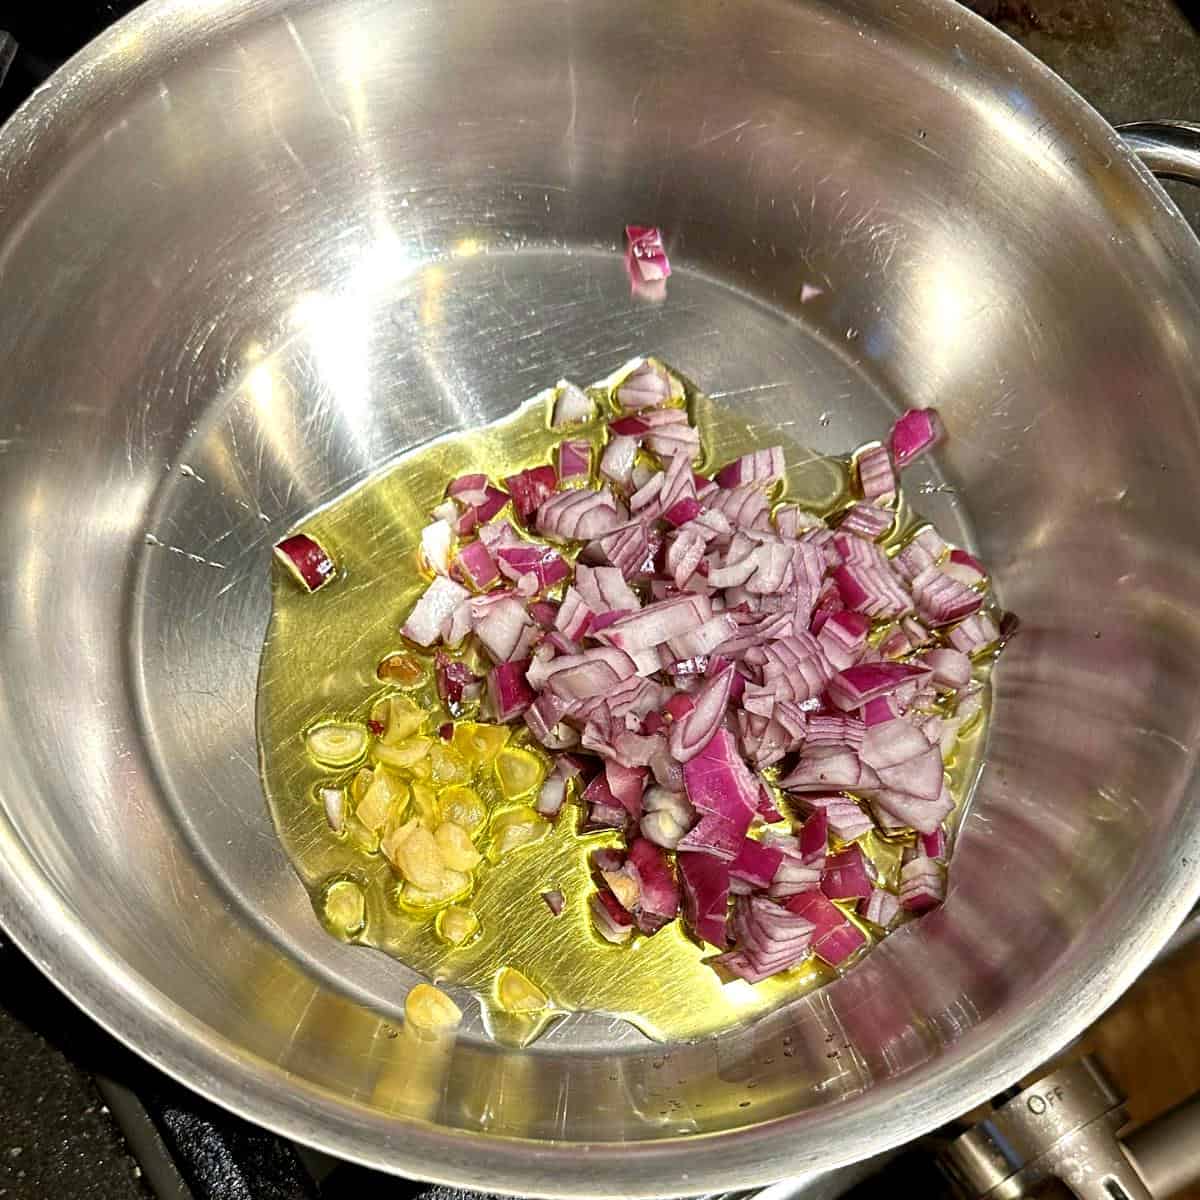 Onions and garlic sauteing in olive oil.